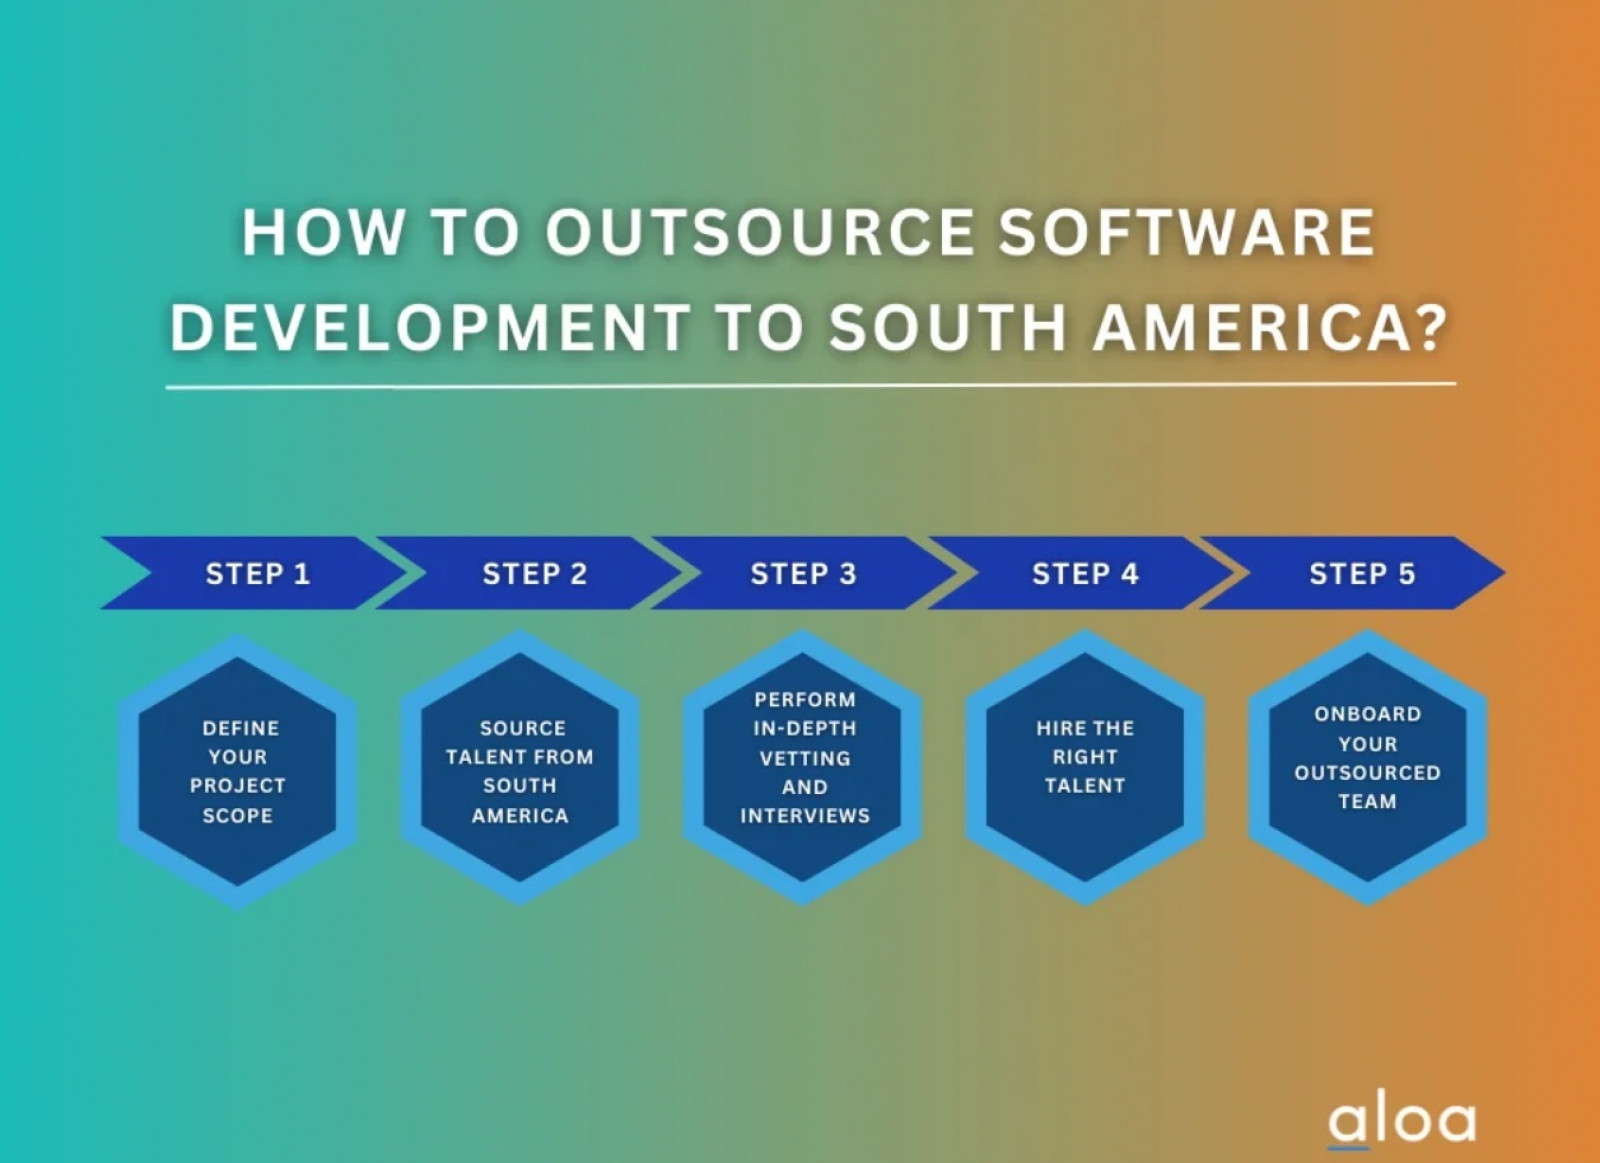 The Process of Outsourcing Software Development to South America - Image